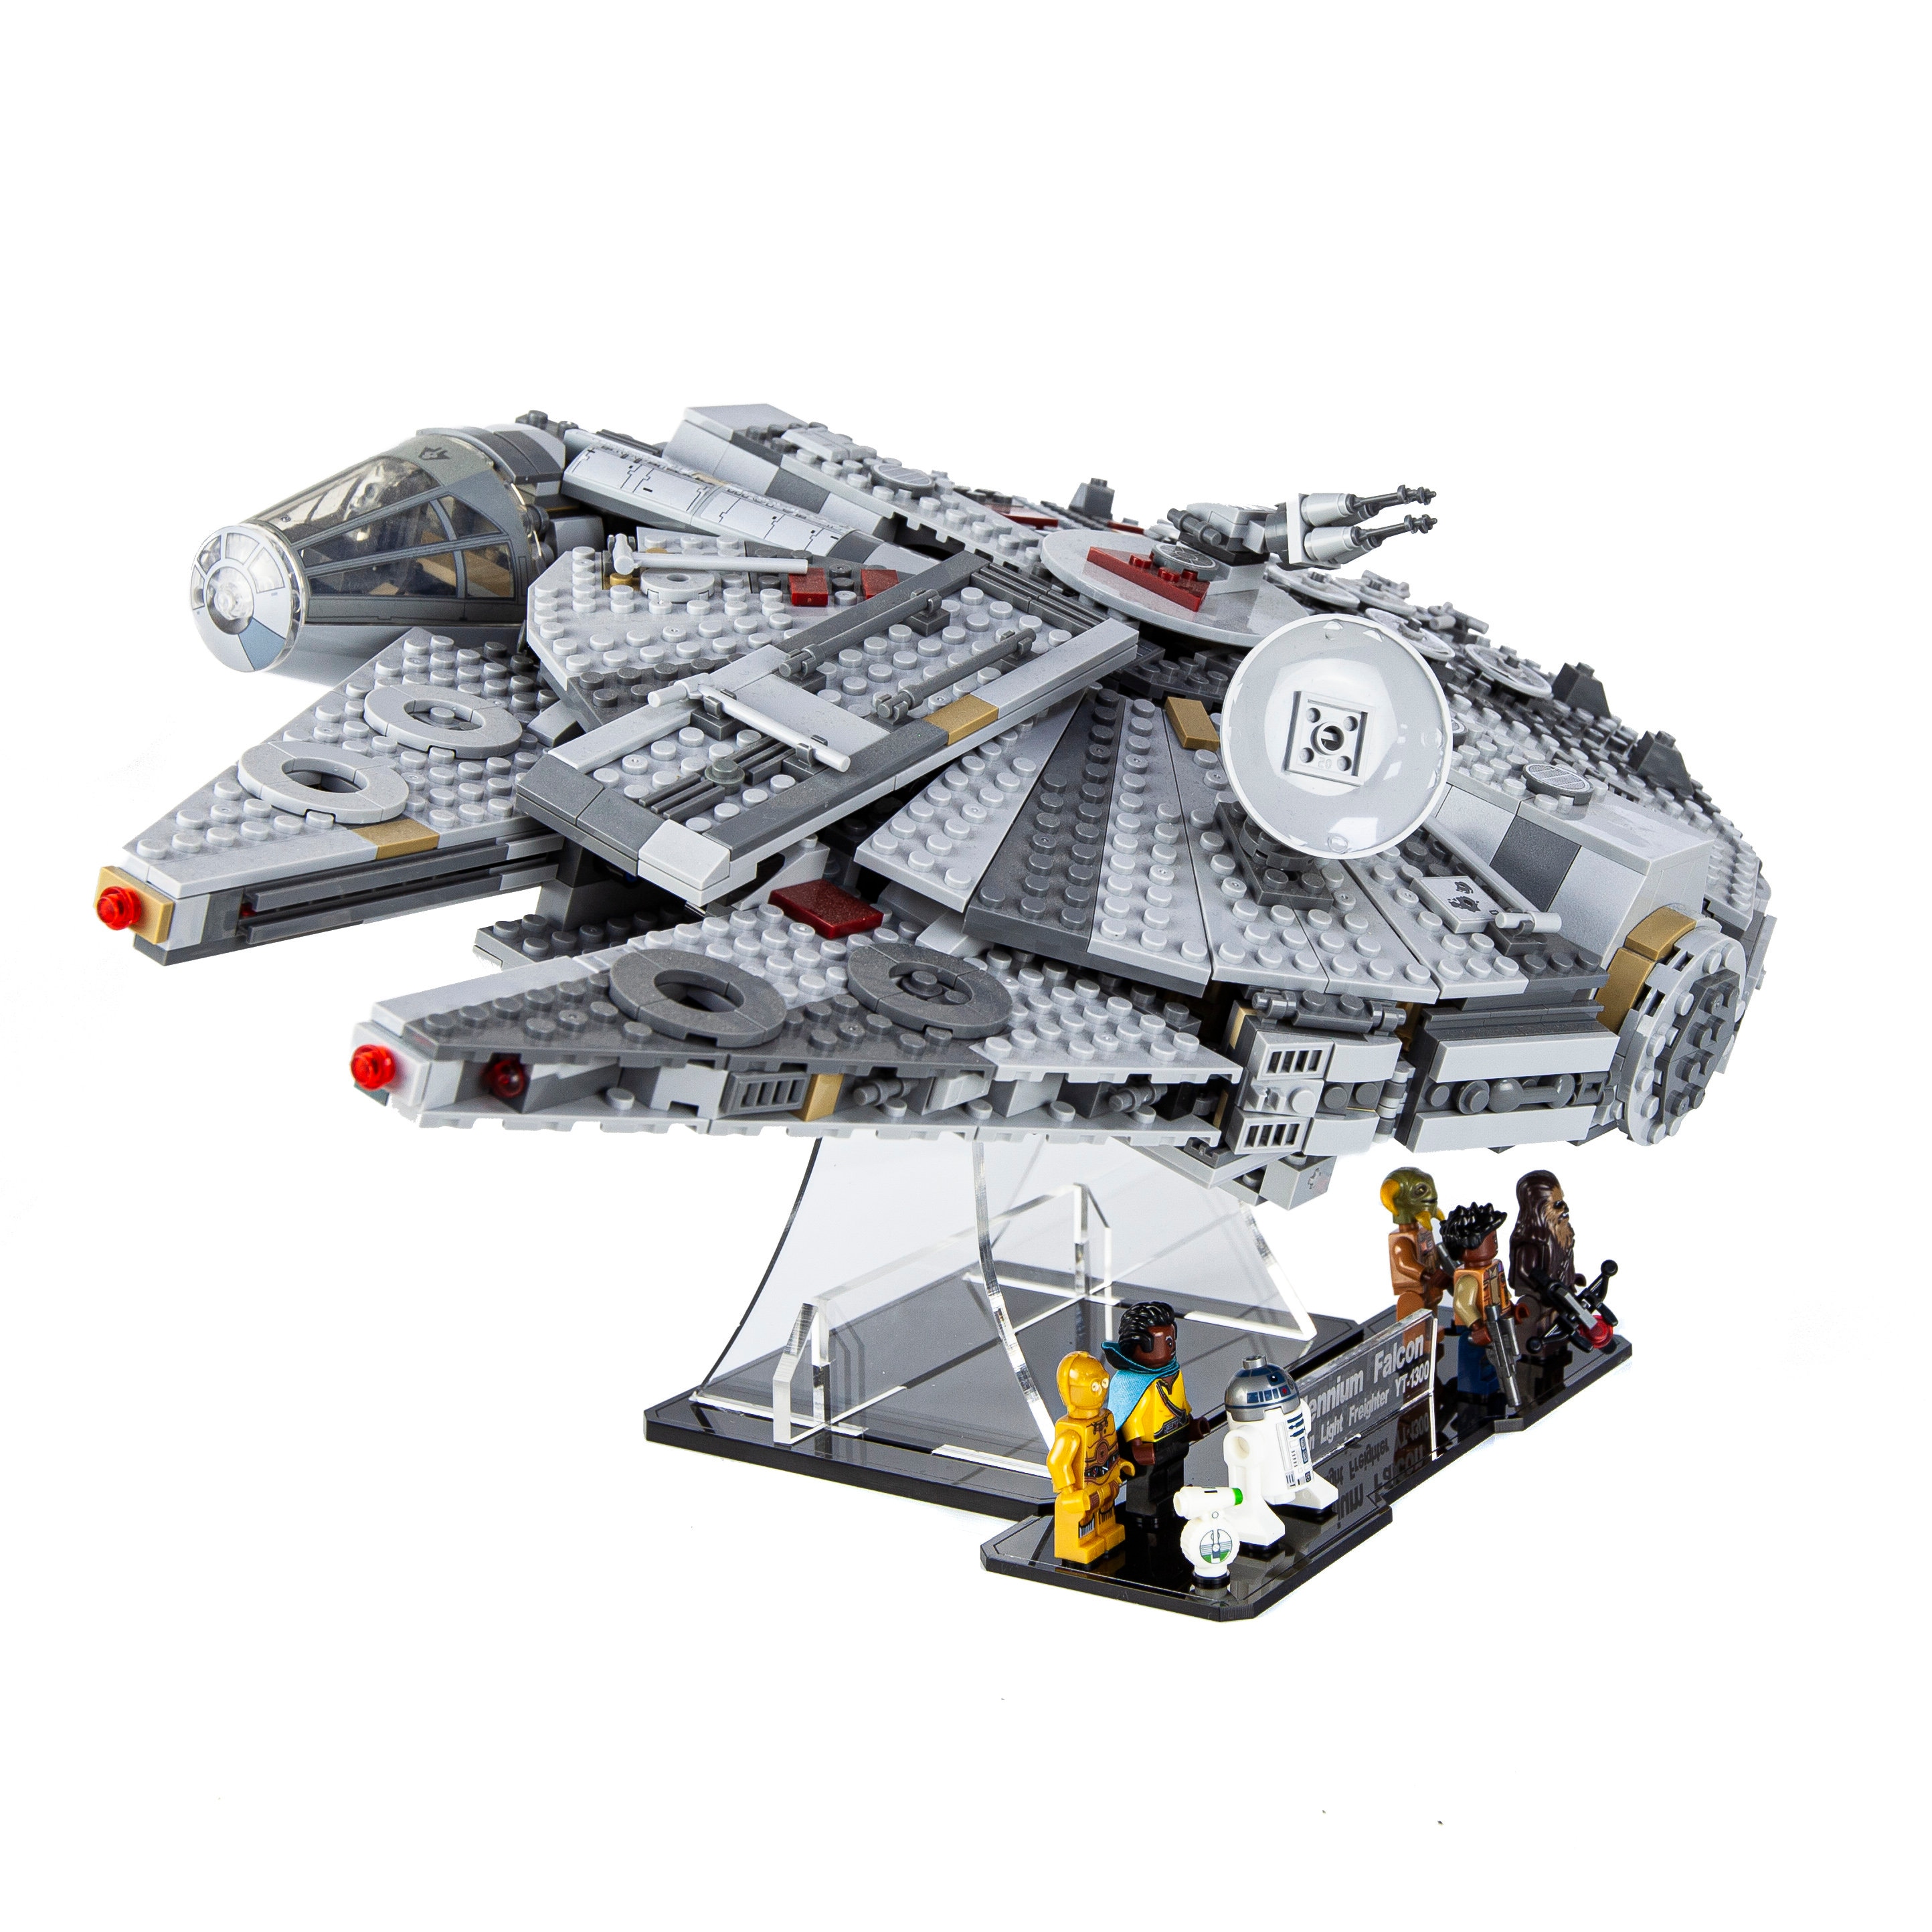 Acrylic Display Stand for Star Wars Millennium Falcon™ 75257 - Etsy